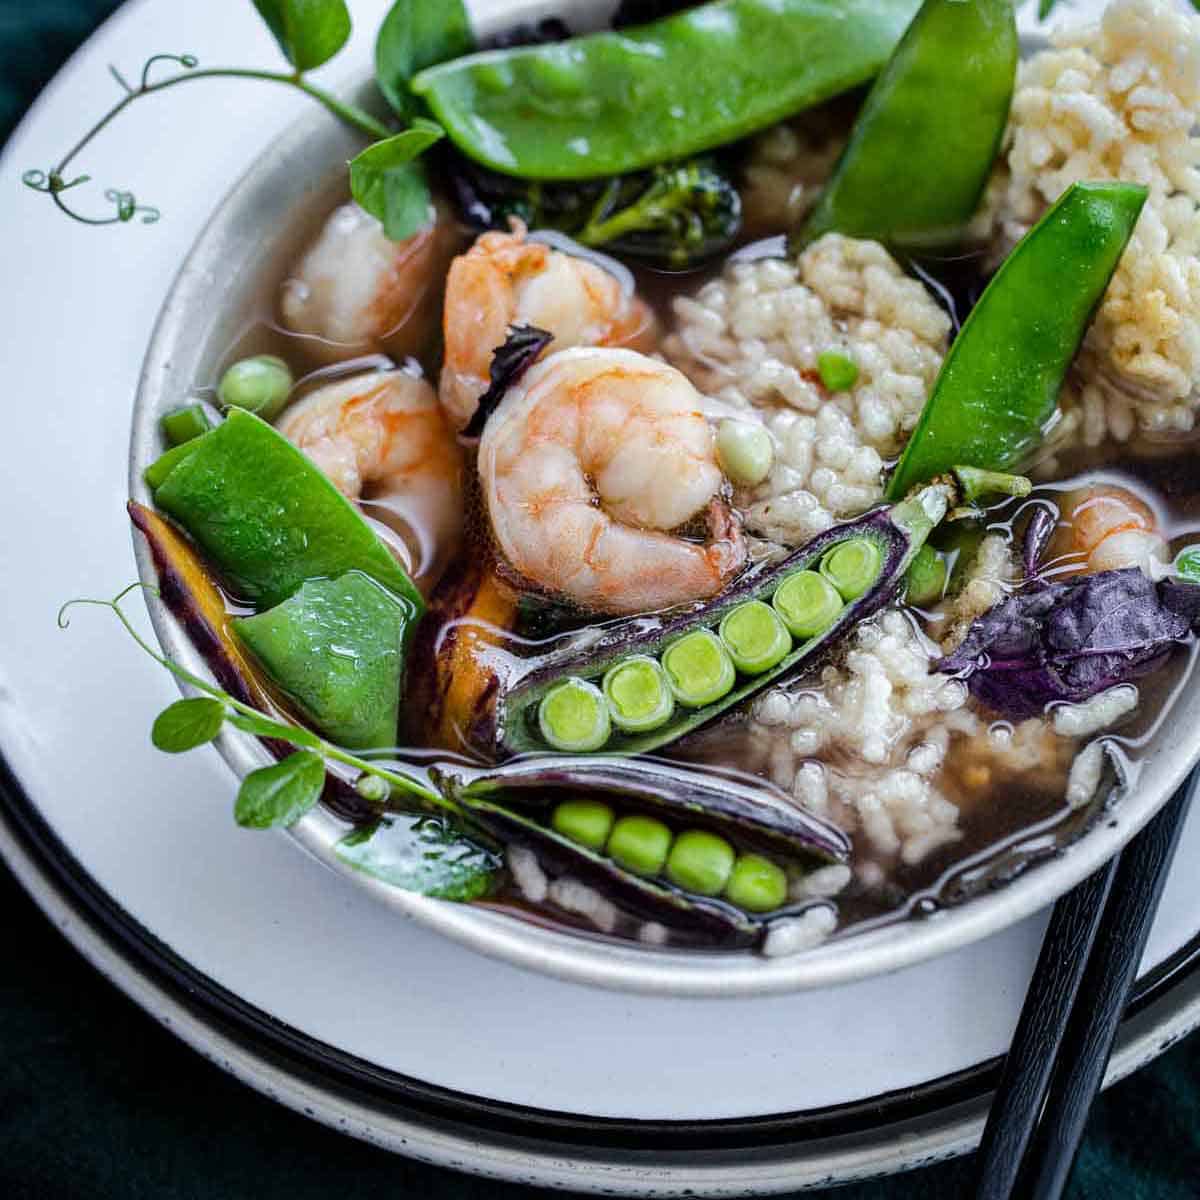 Sizzling Rice Soup is a classic Chinese soup recipe with light flavorful broth, a mixture of proteins and vegetables and crispy puffed rice that sizzles and pops when added to the soup.